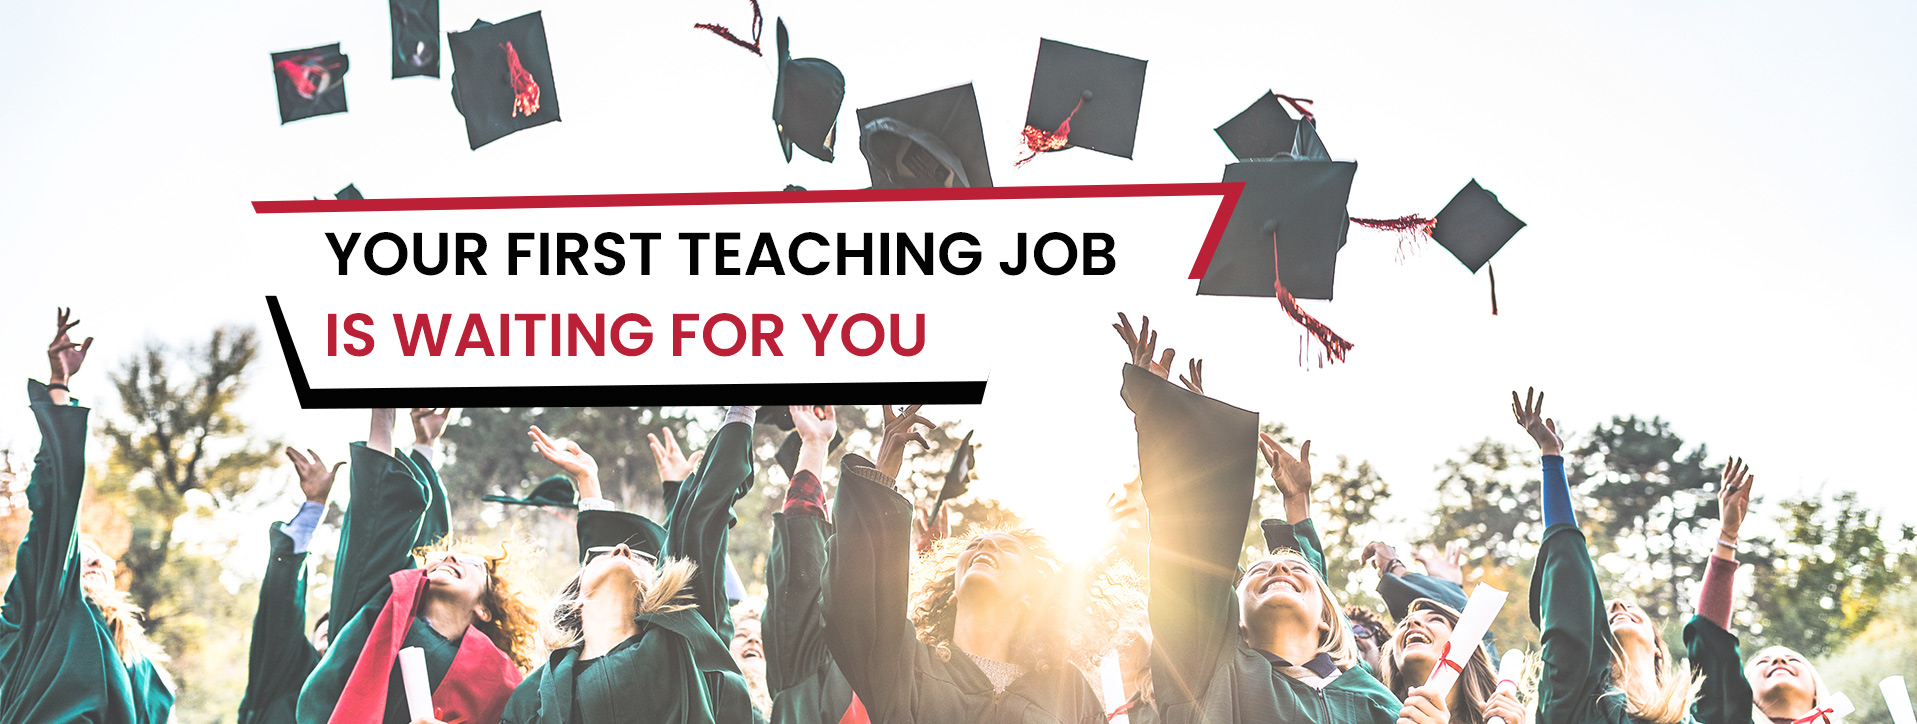 Your first teaching job is waiting for you